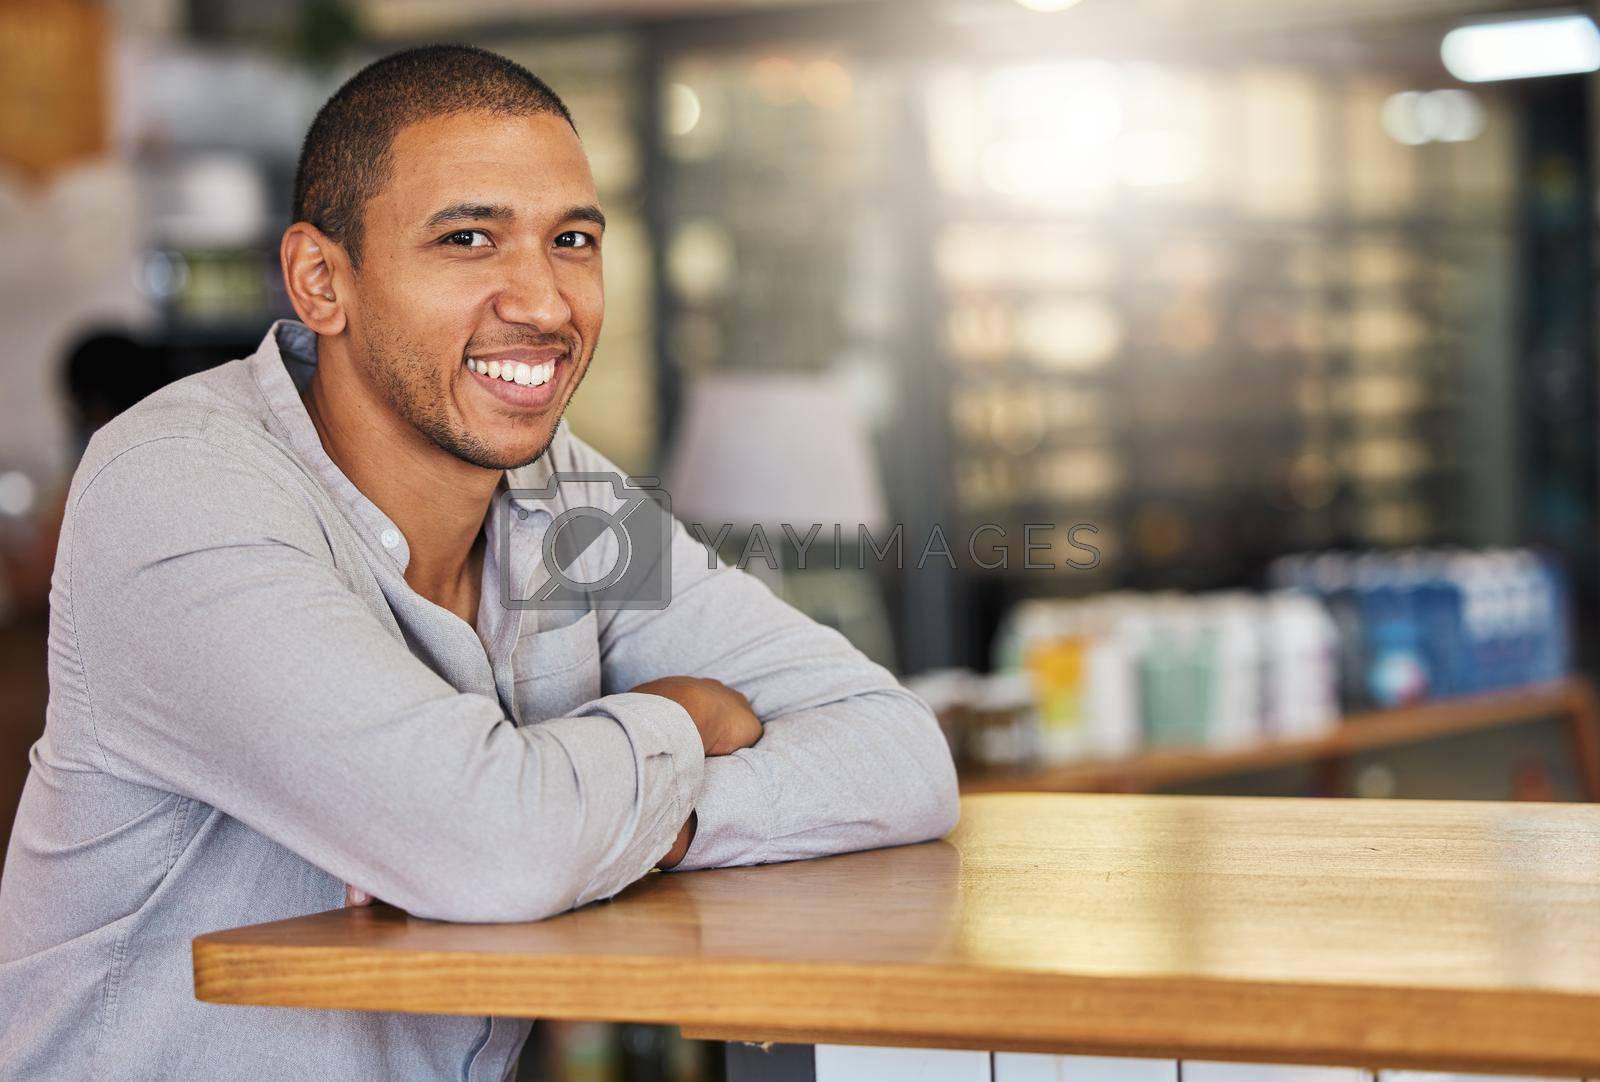 Royalty free image of Entrepreneur or small business owner of cafe or coffee shop at counter happy and smiling. Young, confident and successful boss, manager or leader of a hospitality startup restaurant, bistro or store by YuriArcurs